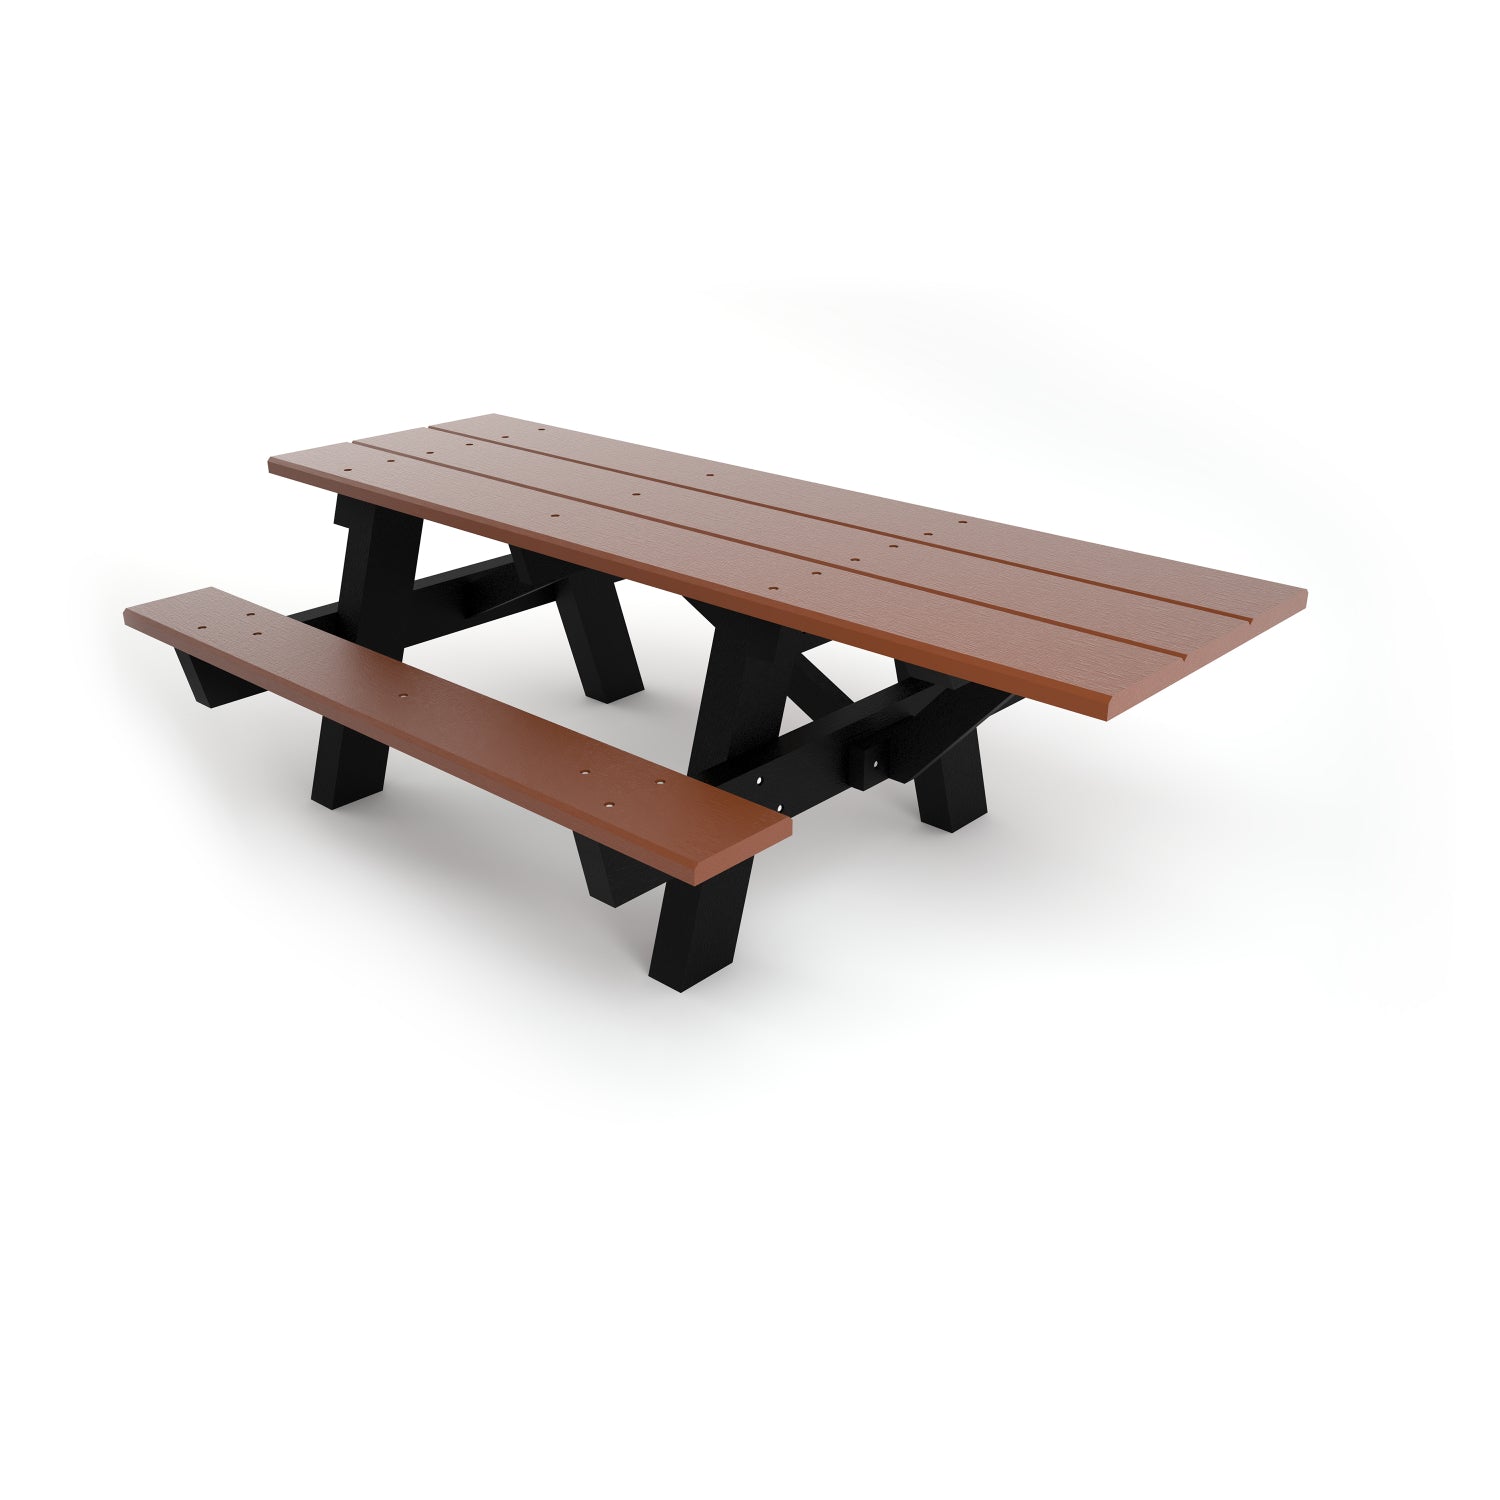 Frog Furnishings A-Frame Resinwood ADA Outdoor Picnic Table. 6 Ft. Long